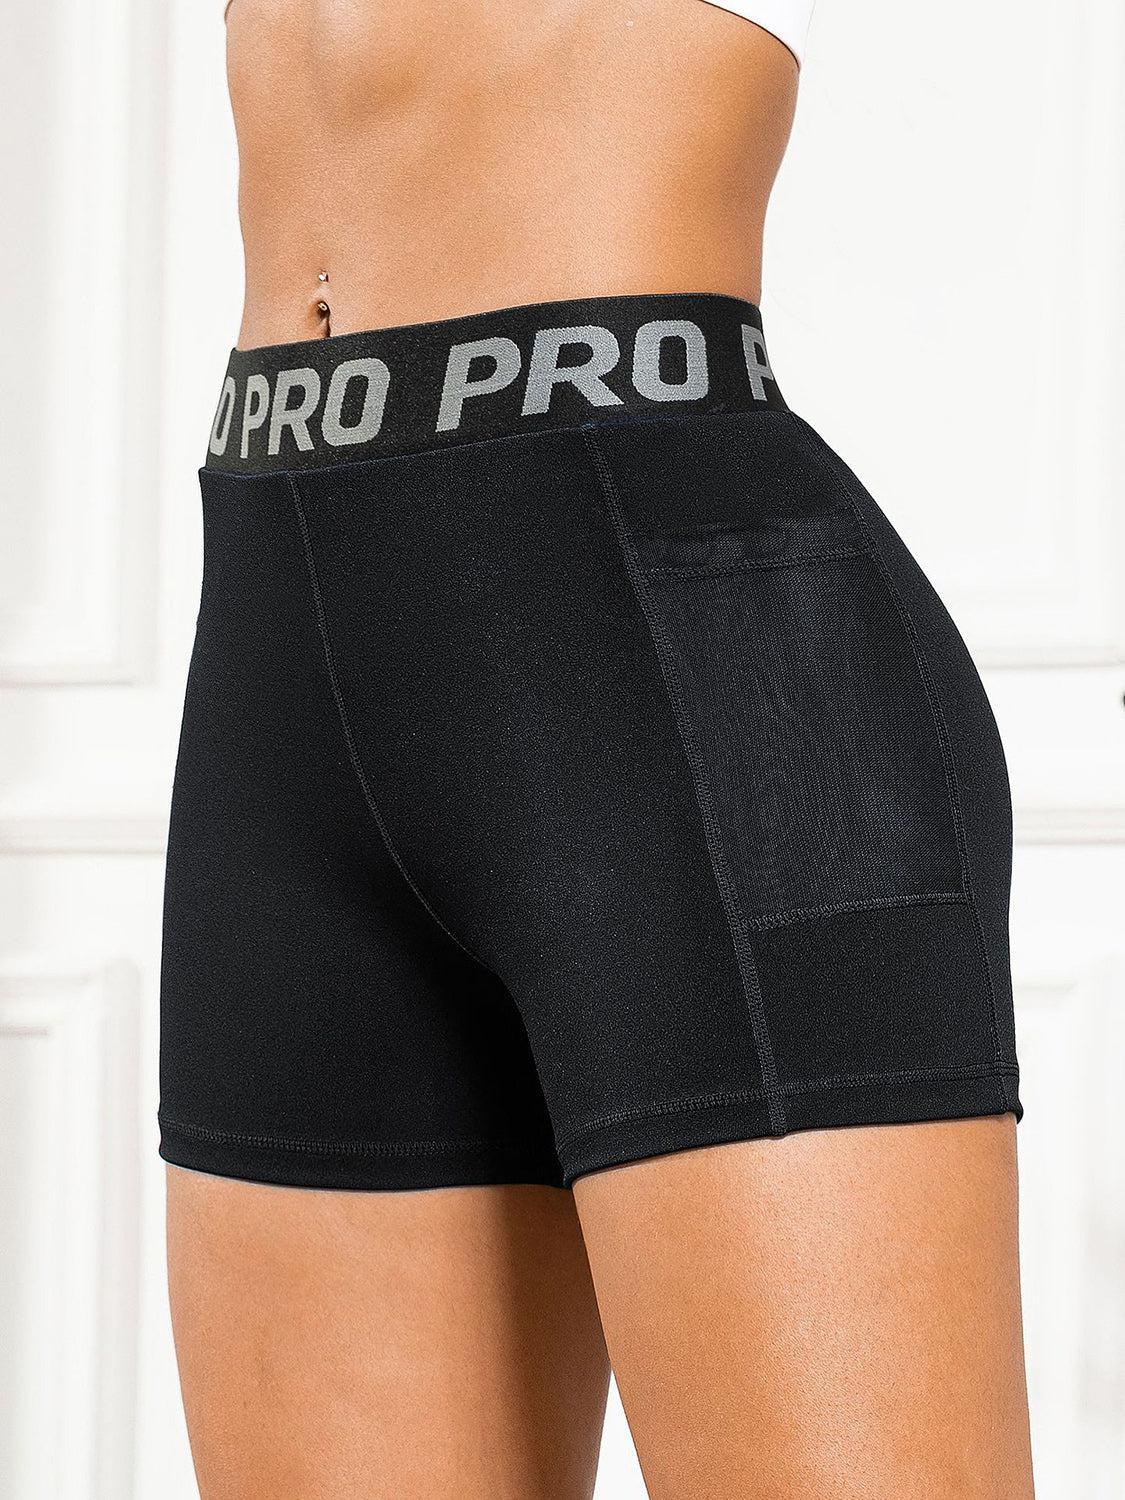 a woman in black shorts with the word pro pro printed on it